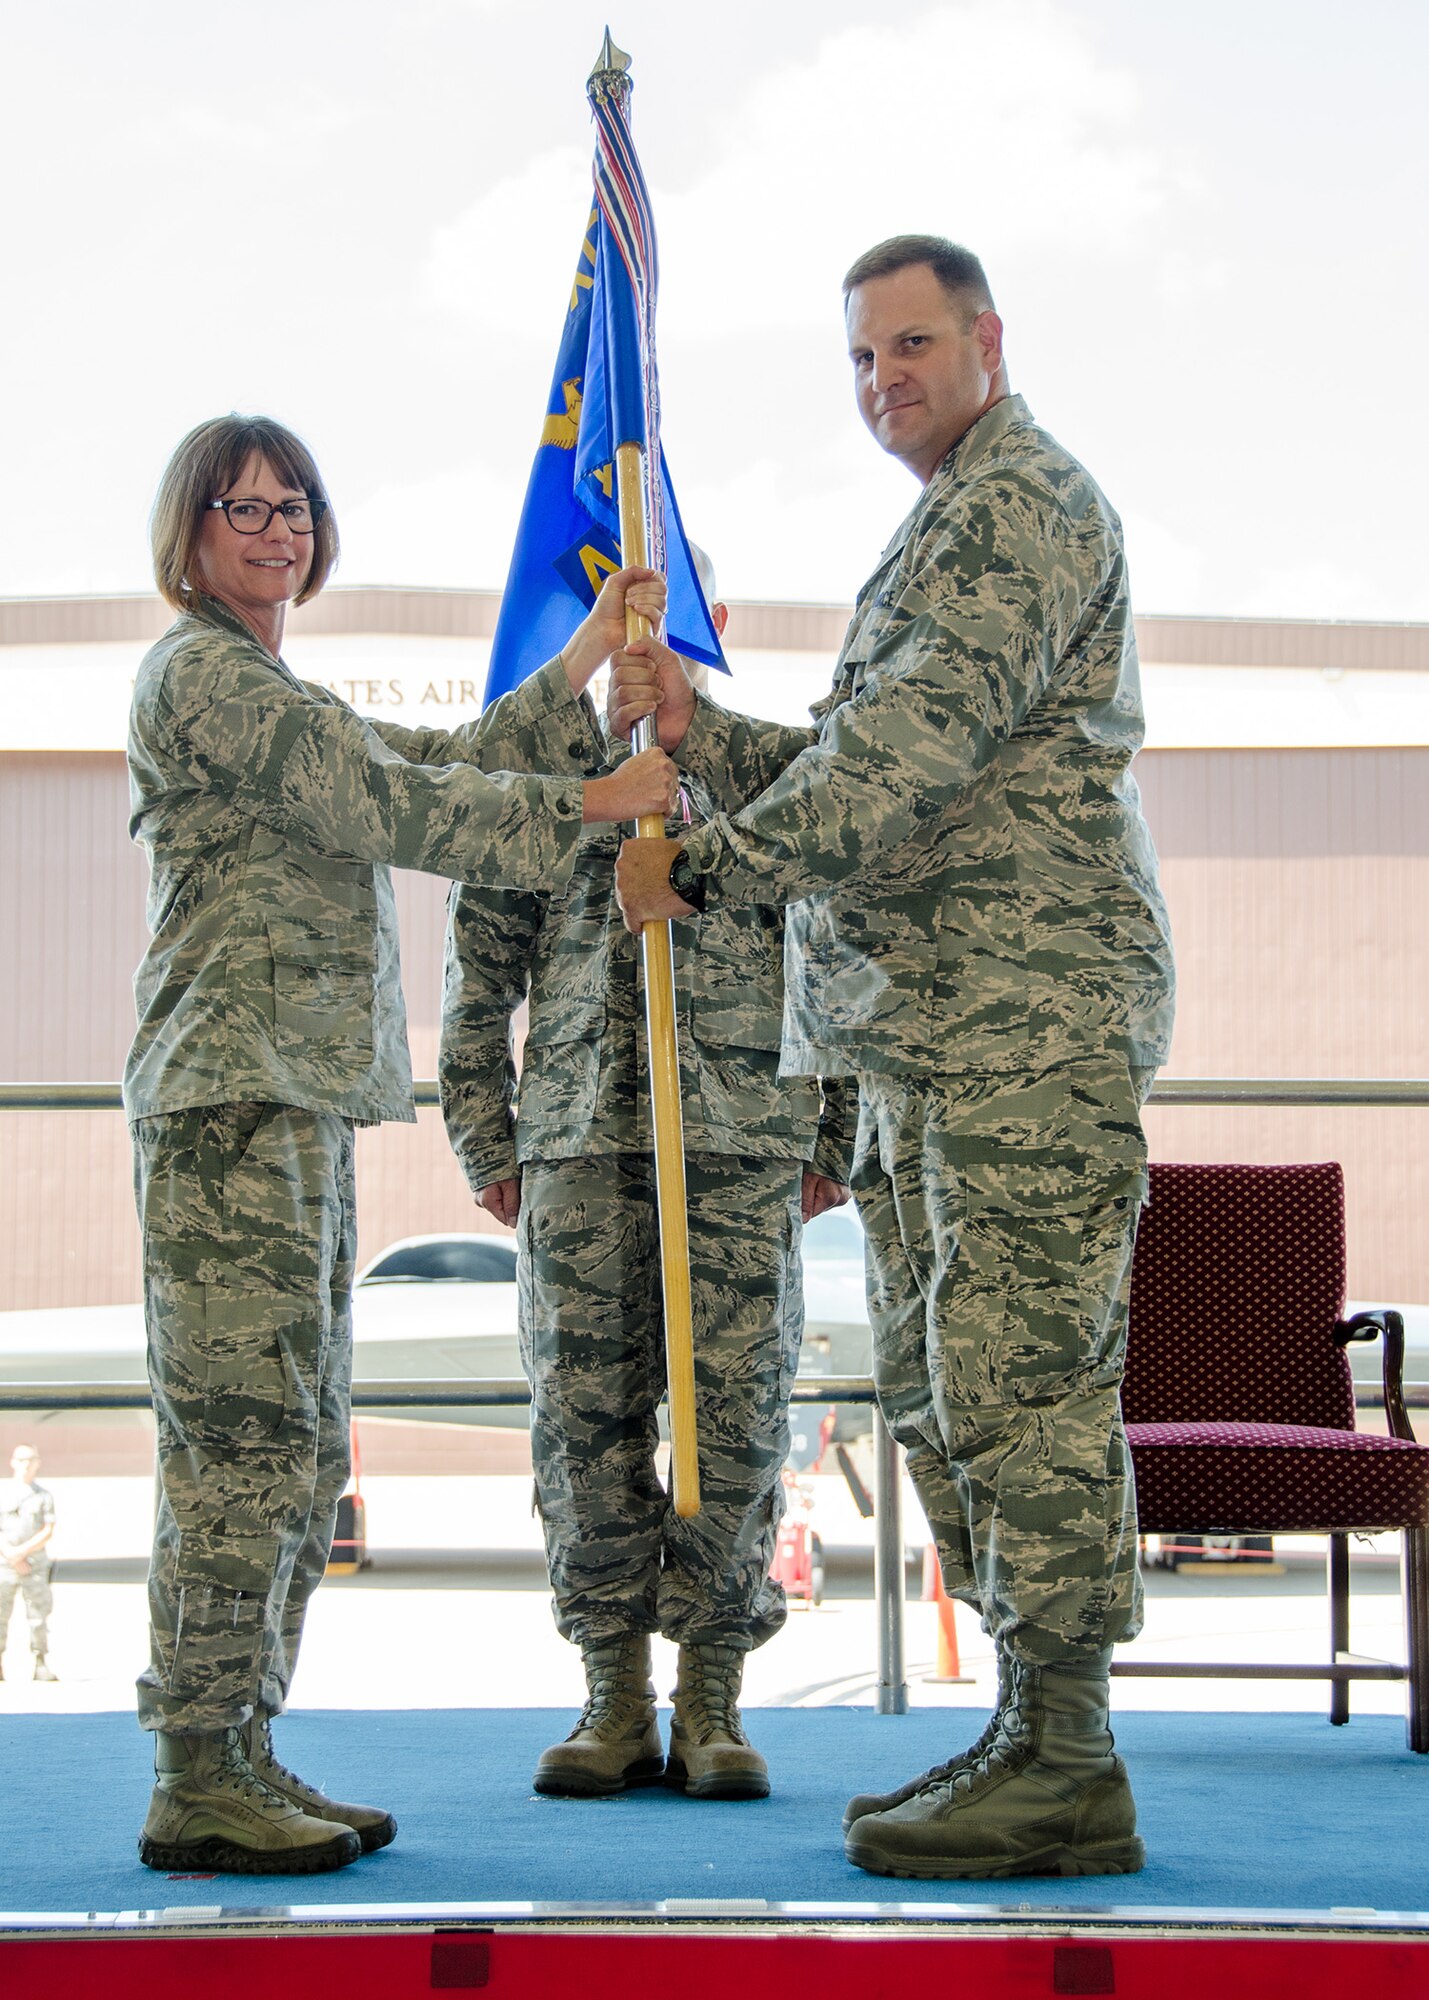 Lt. Col. Michael Belardo, the new 131st Aircraft Maintenance Squadron commander, takes the guidon from Col. Kimbra Sterr, commander of the 131st Maintenance Group during a change of command ceremony during the Missouri Air National Guard's 131st Bomb Wing July drill weekend at Whiteman Air Force Base, Missouri. Belardo, previously the director of operations for the 509th Operations Support Squadron, is replacing outgoing squadron commander Lt. Col. Matthew Calhoun, who will serve as the new 131st BW vice commander. (U.S. Air National Guard photo by Airman 1st Class Halley Burgess)